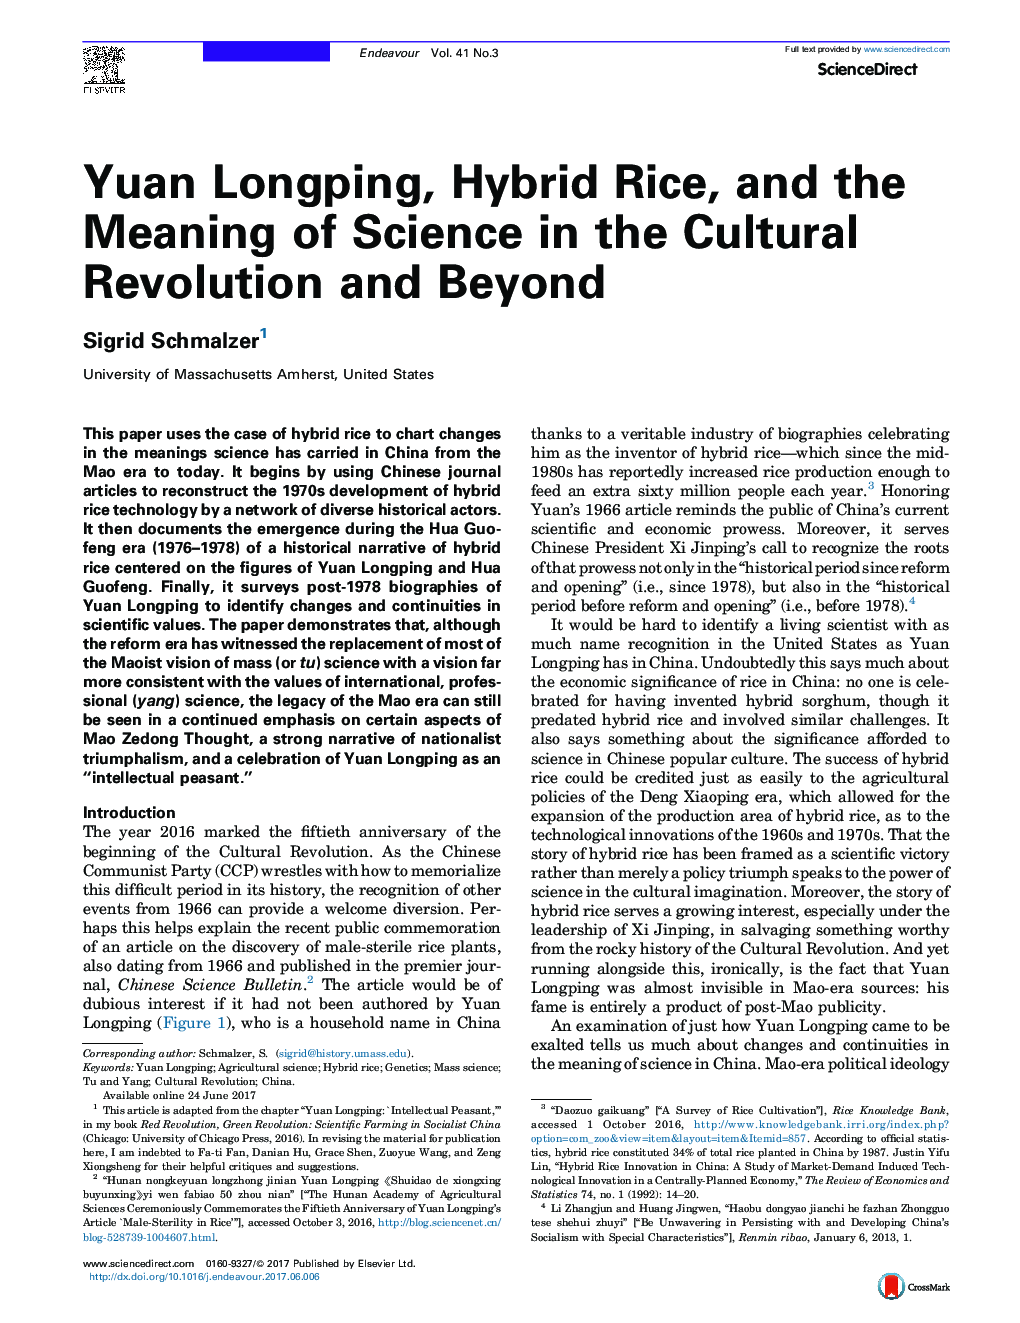 Yuan Longping, Hybrid Rice, and the Meaning of Science in the Cultural Revolution and Beyond